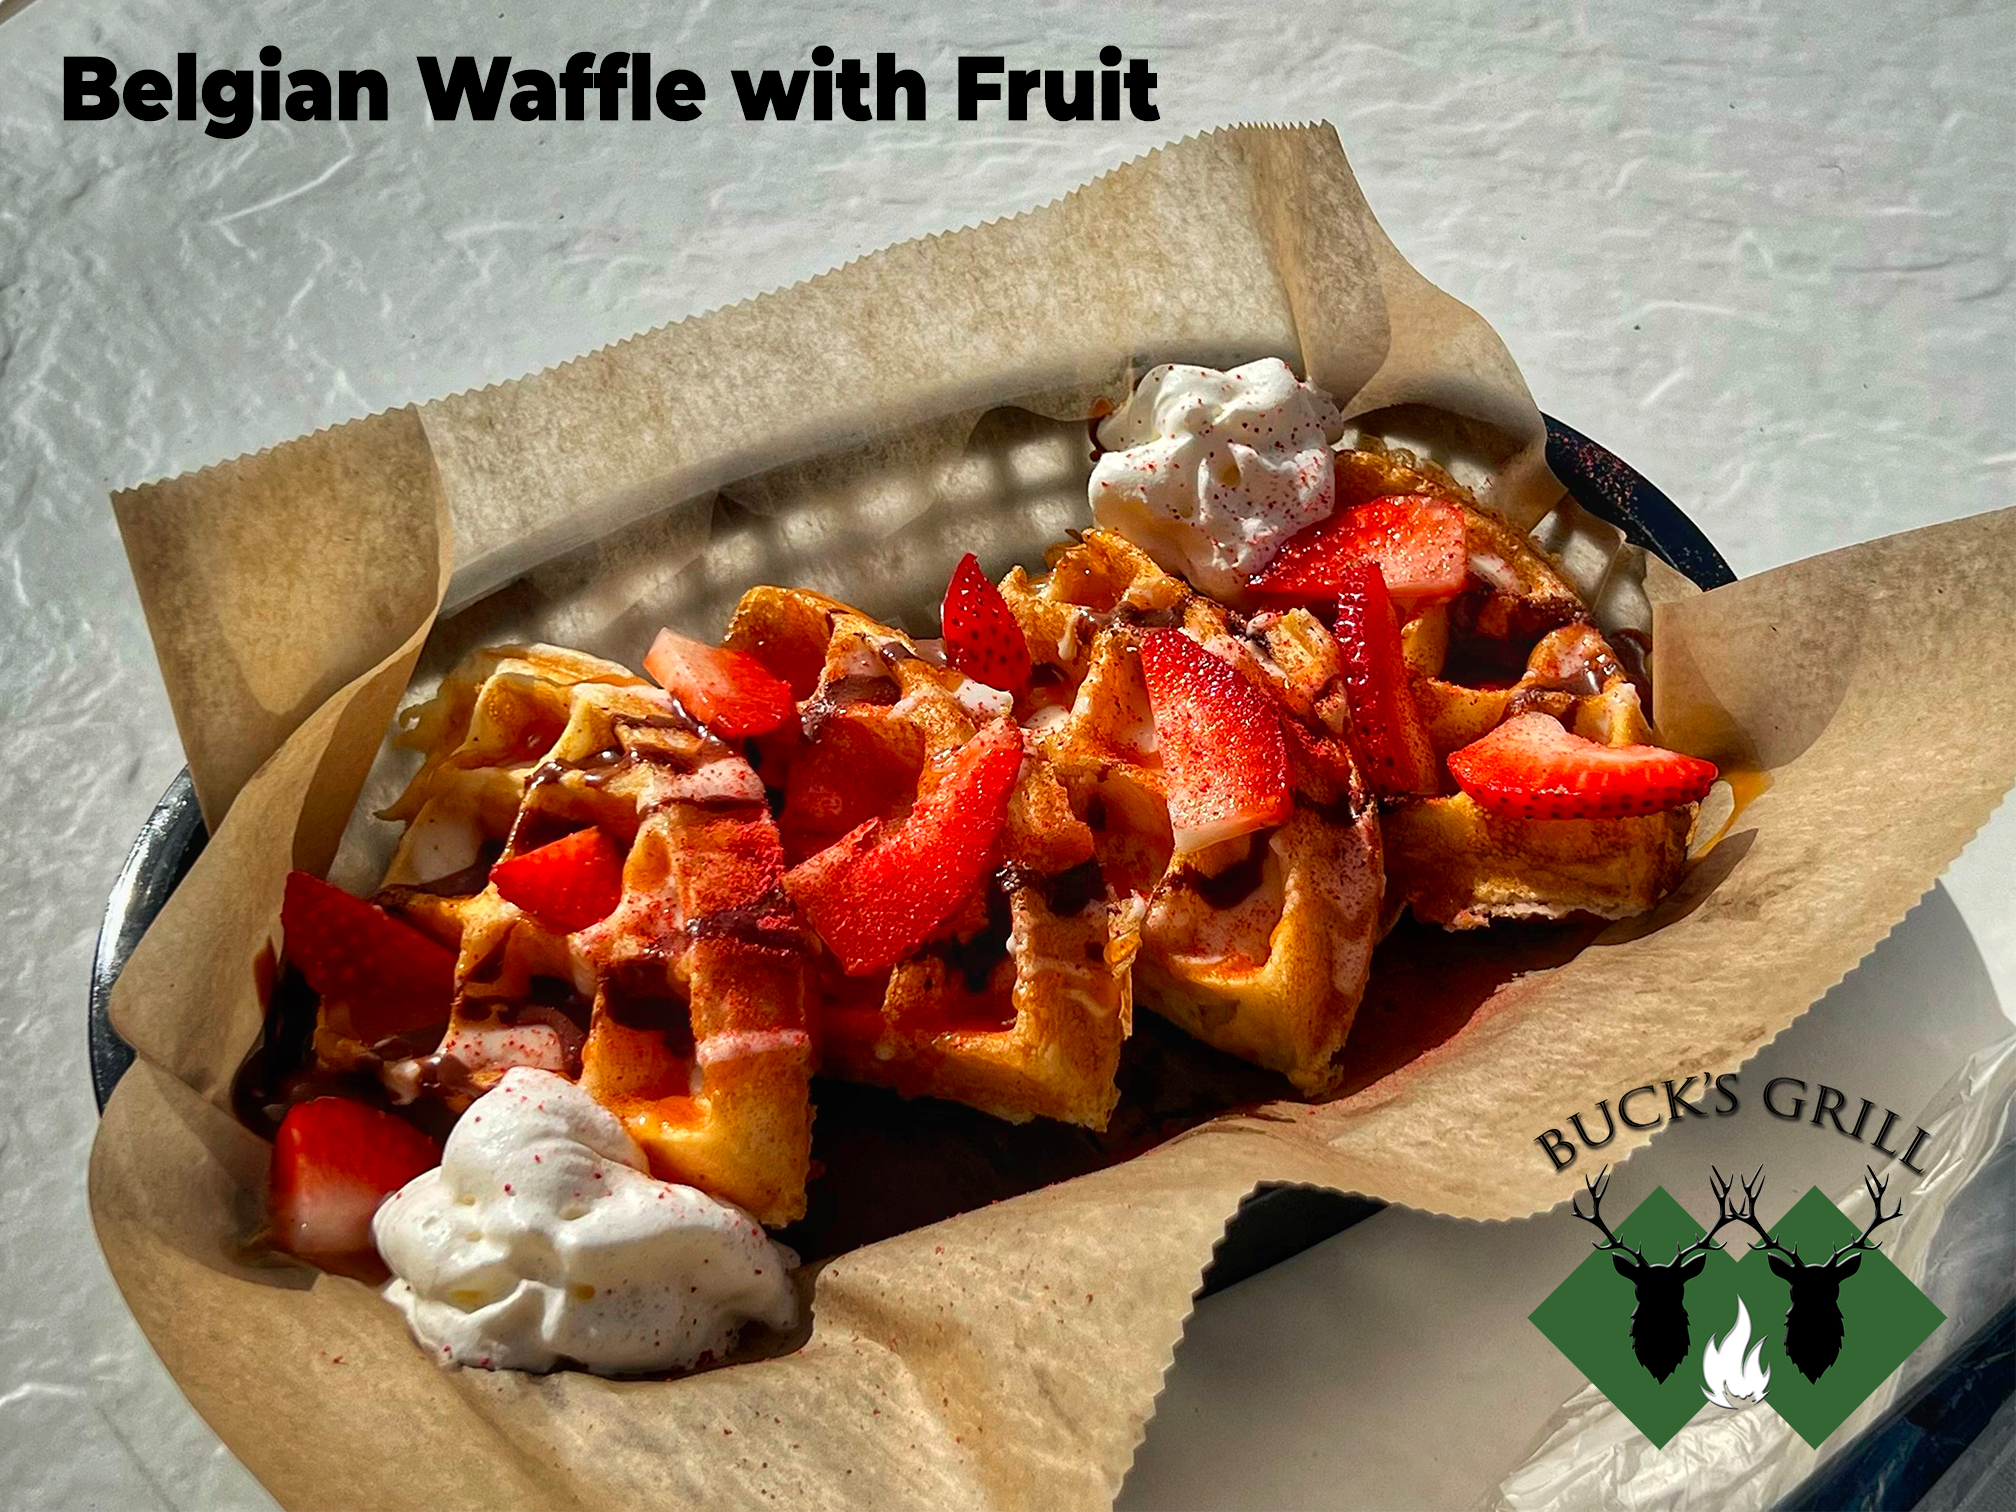 Belgian Waffle with Fruit at Bucks Grill